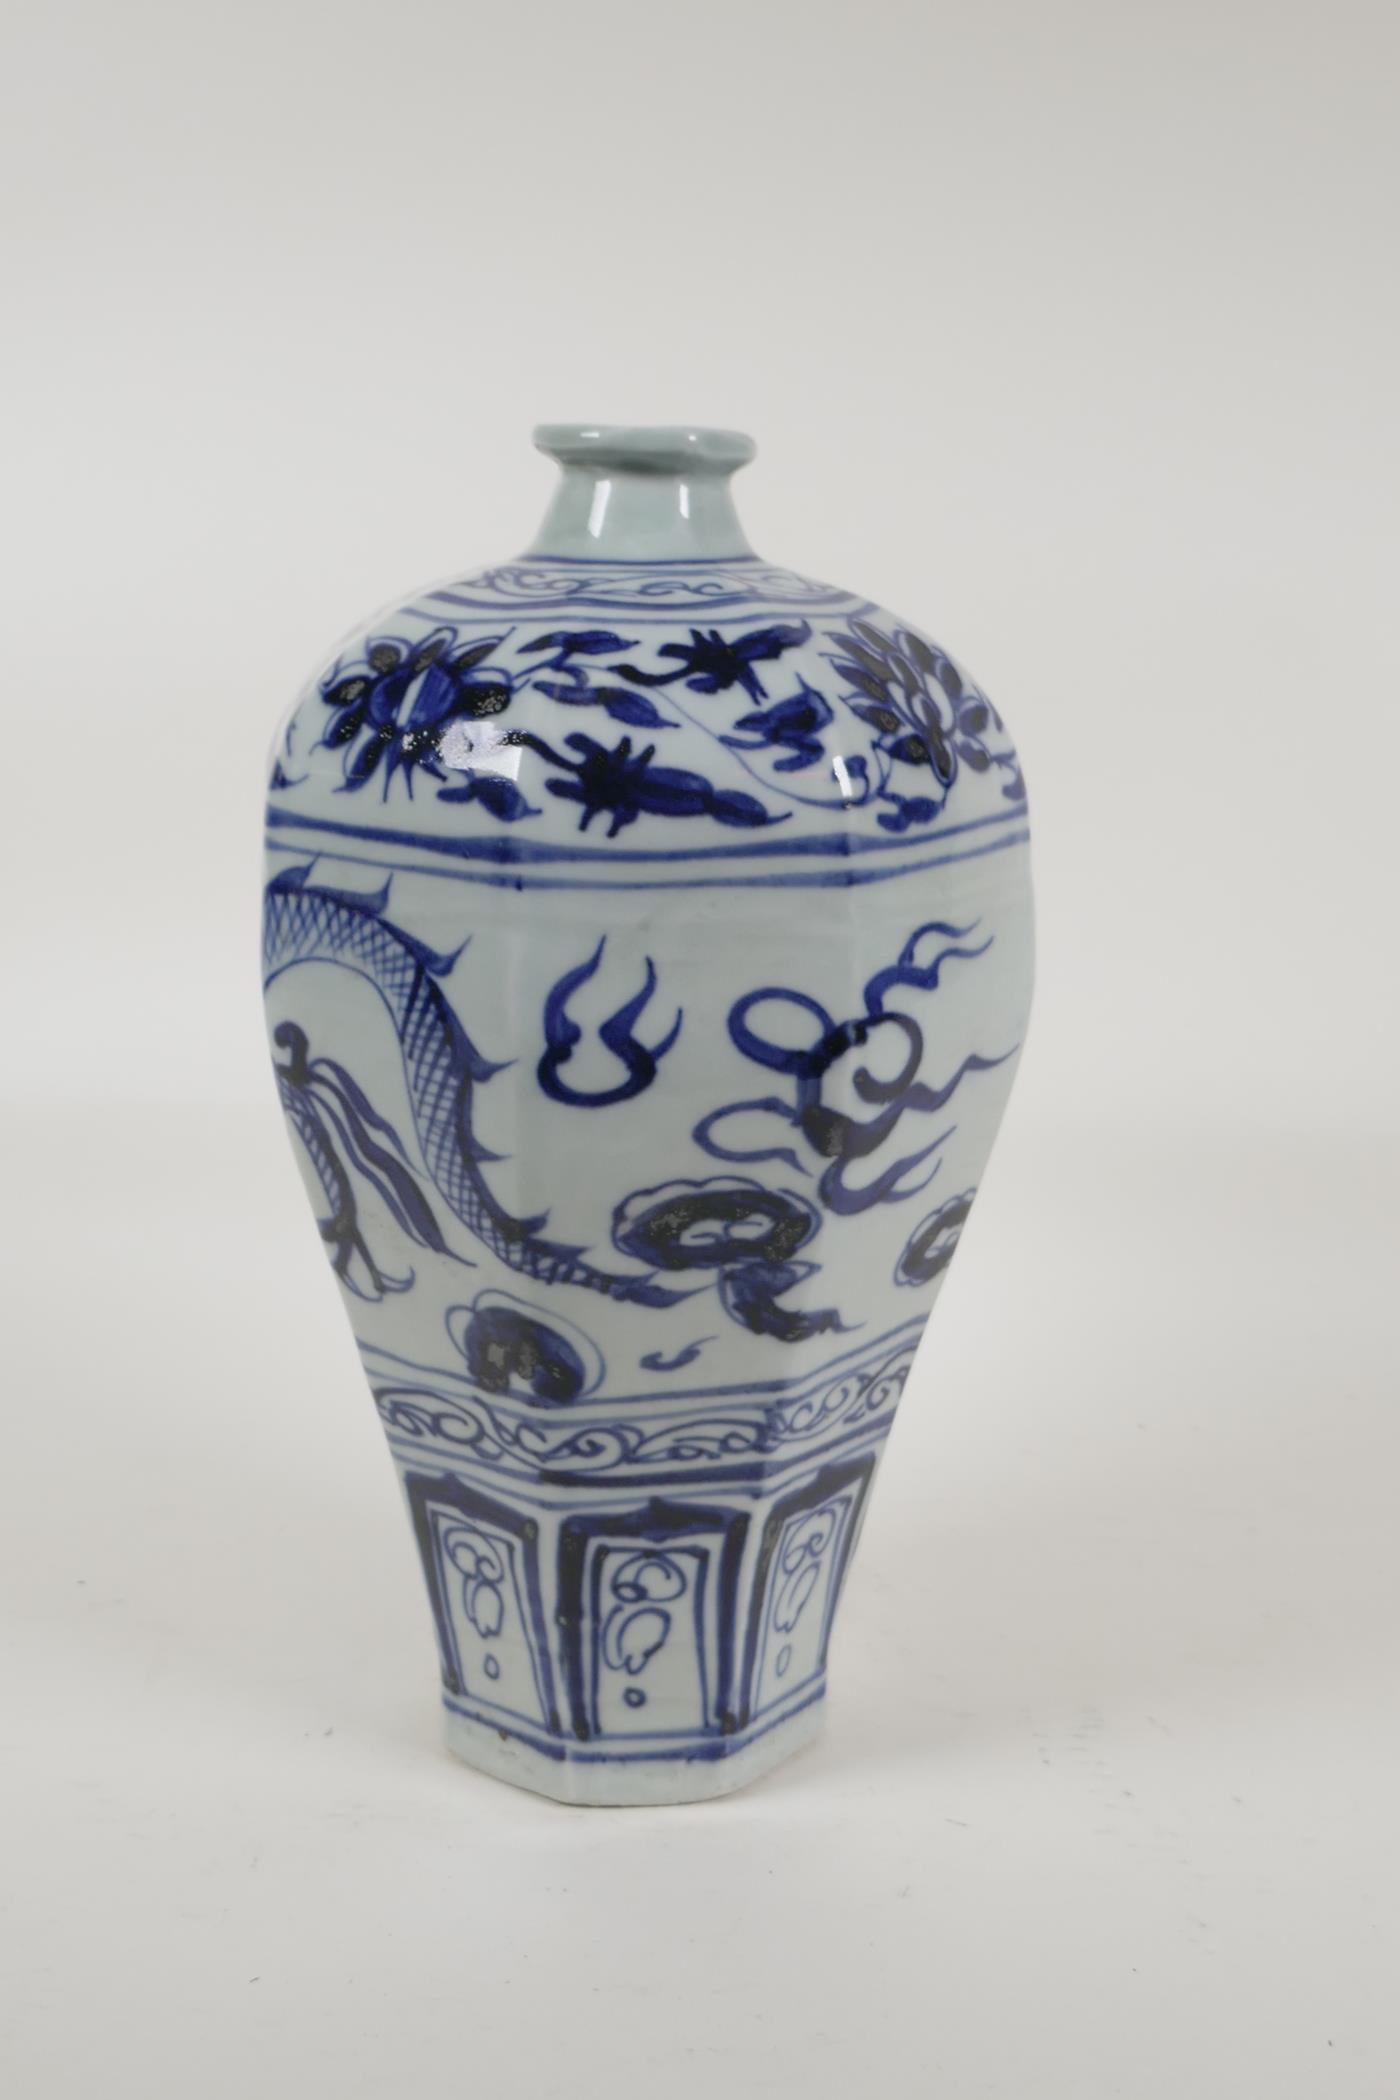 A Chinese blue and white porcelain octagonal vase with dragon and flaming pearl decoration, 10" high - Image 4 of 5